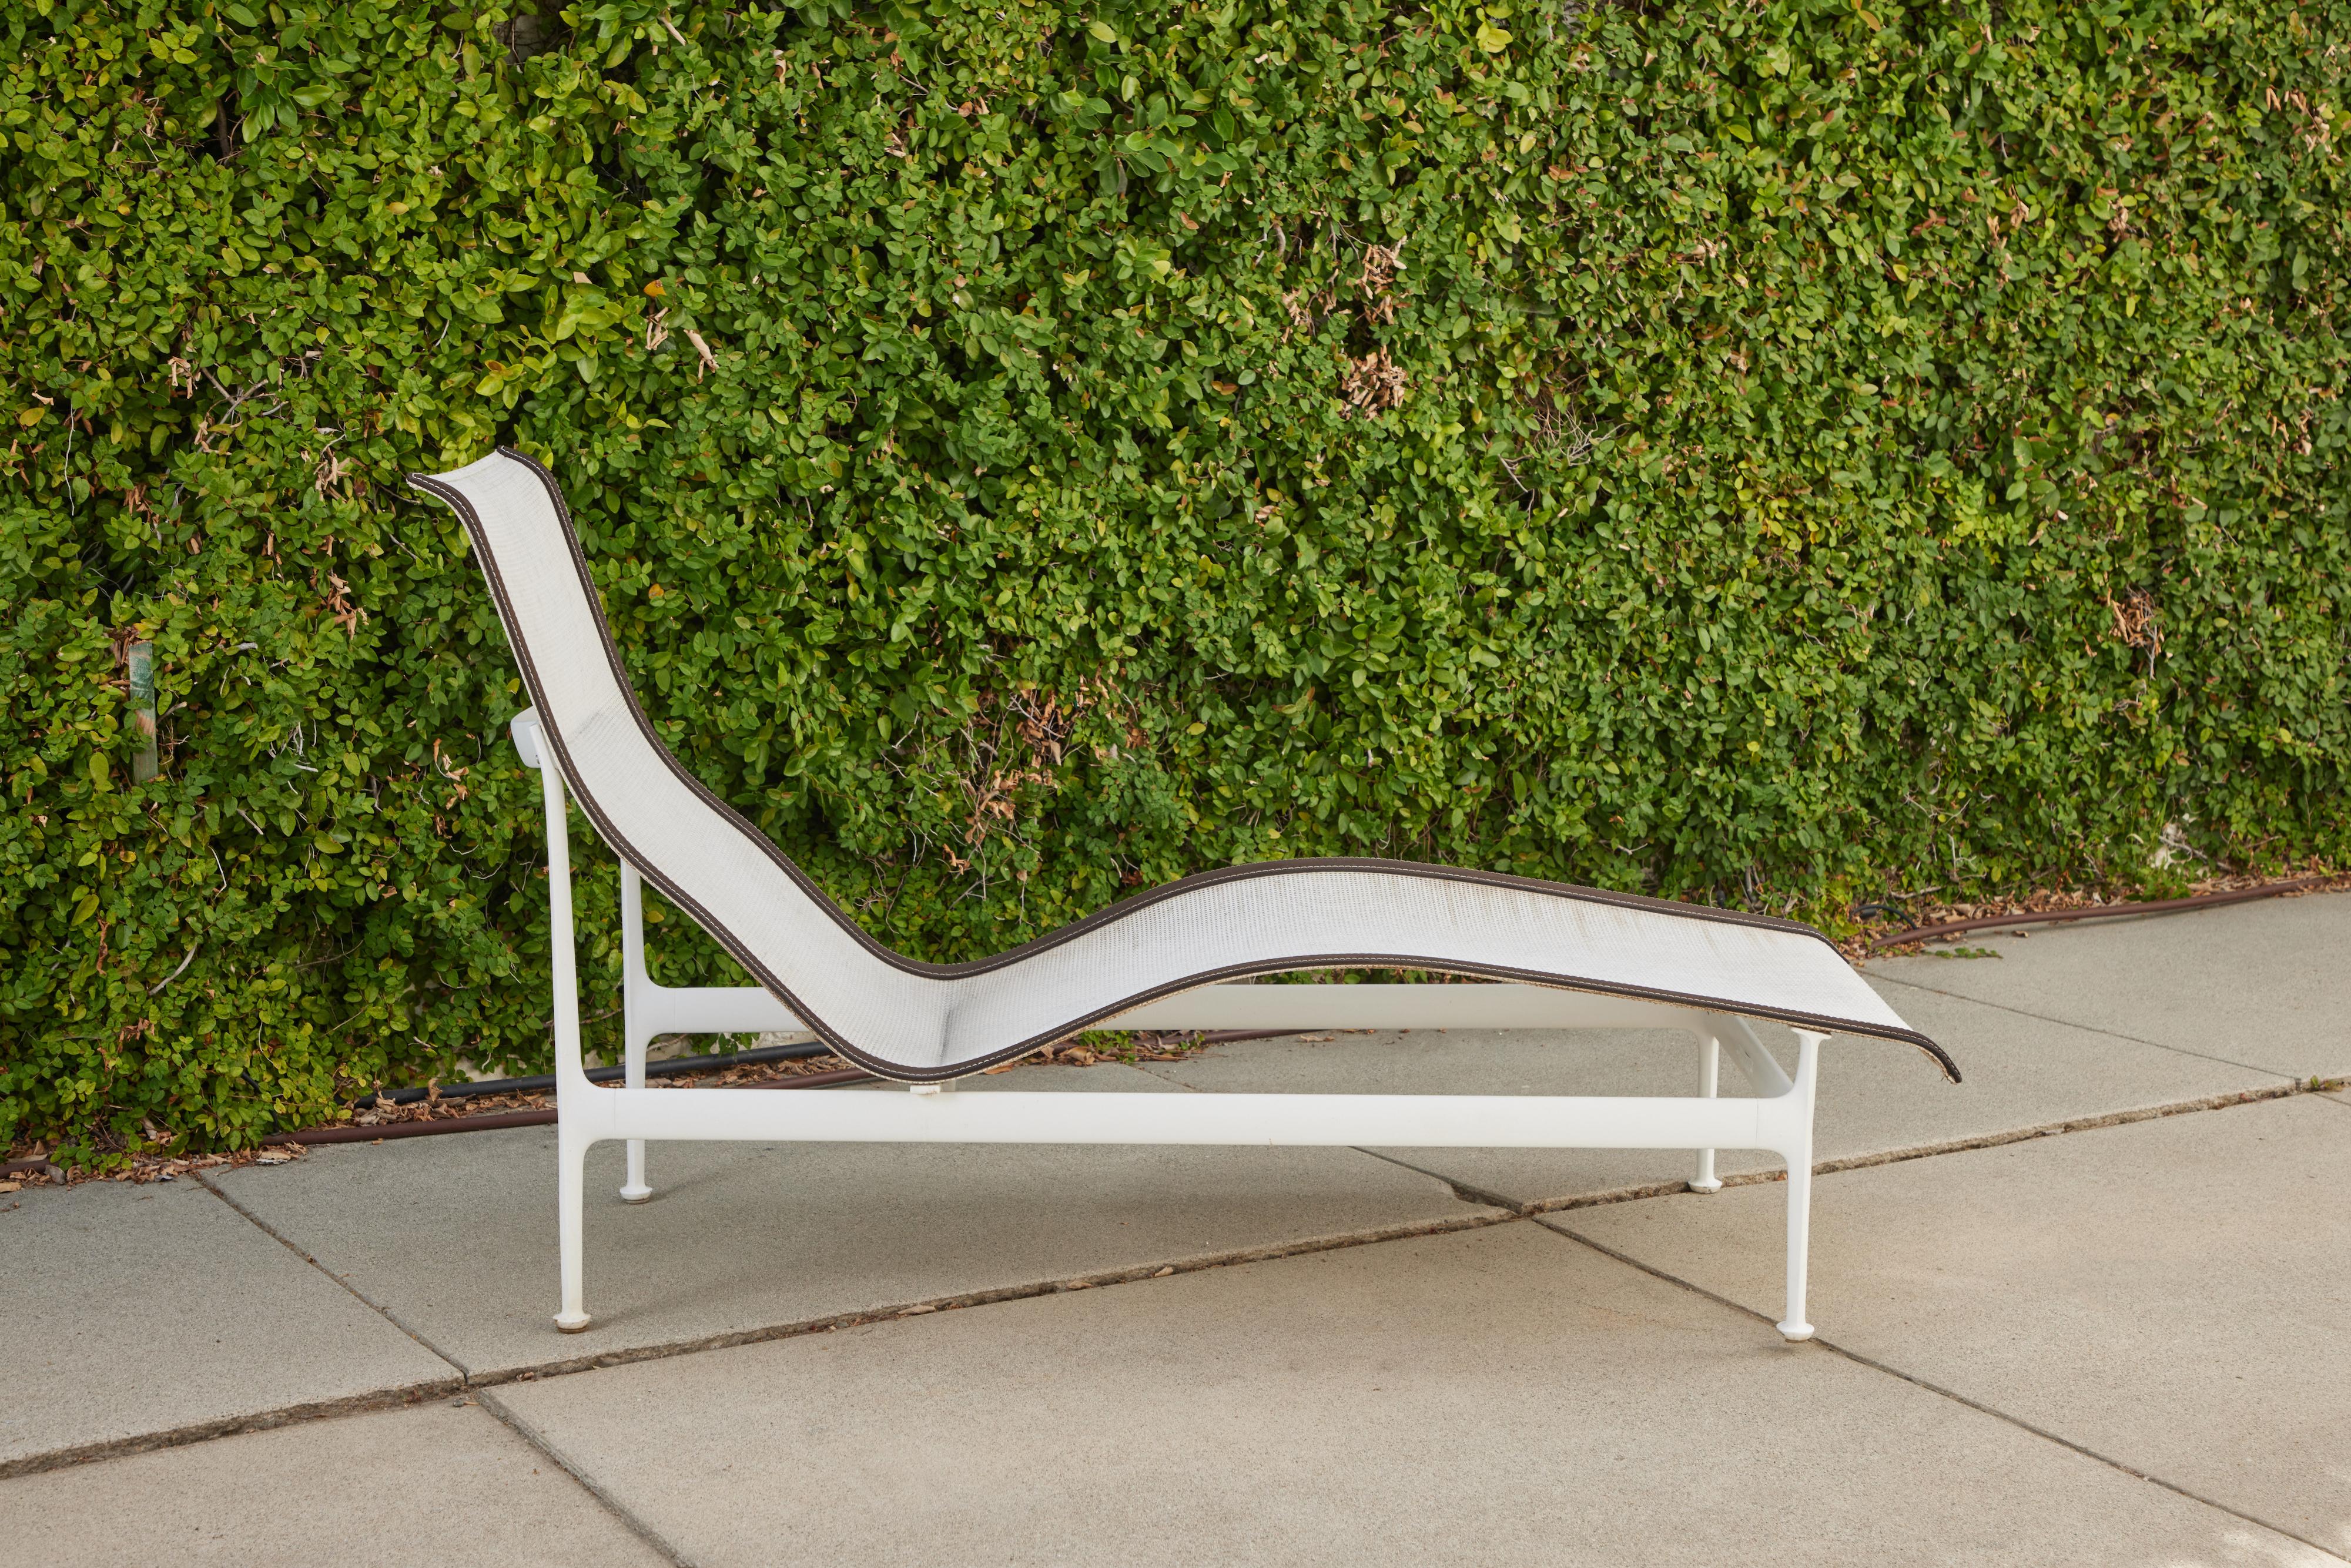 American Vintage 1966 Richard Schultz Outdoor Contour Chaise Lounge for Knoll